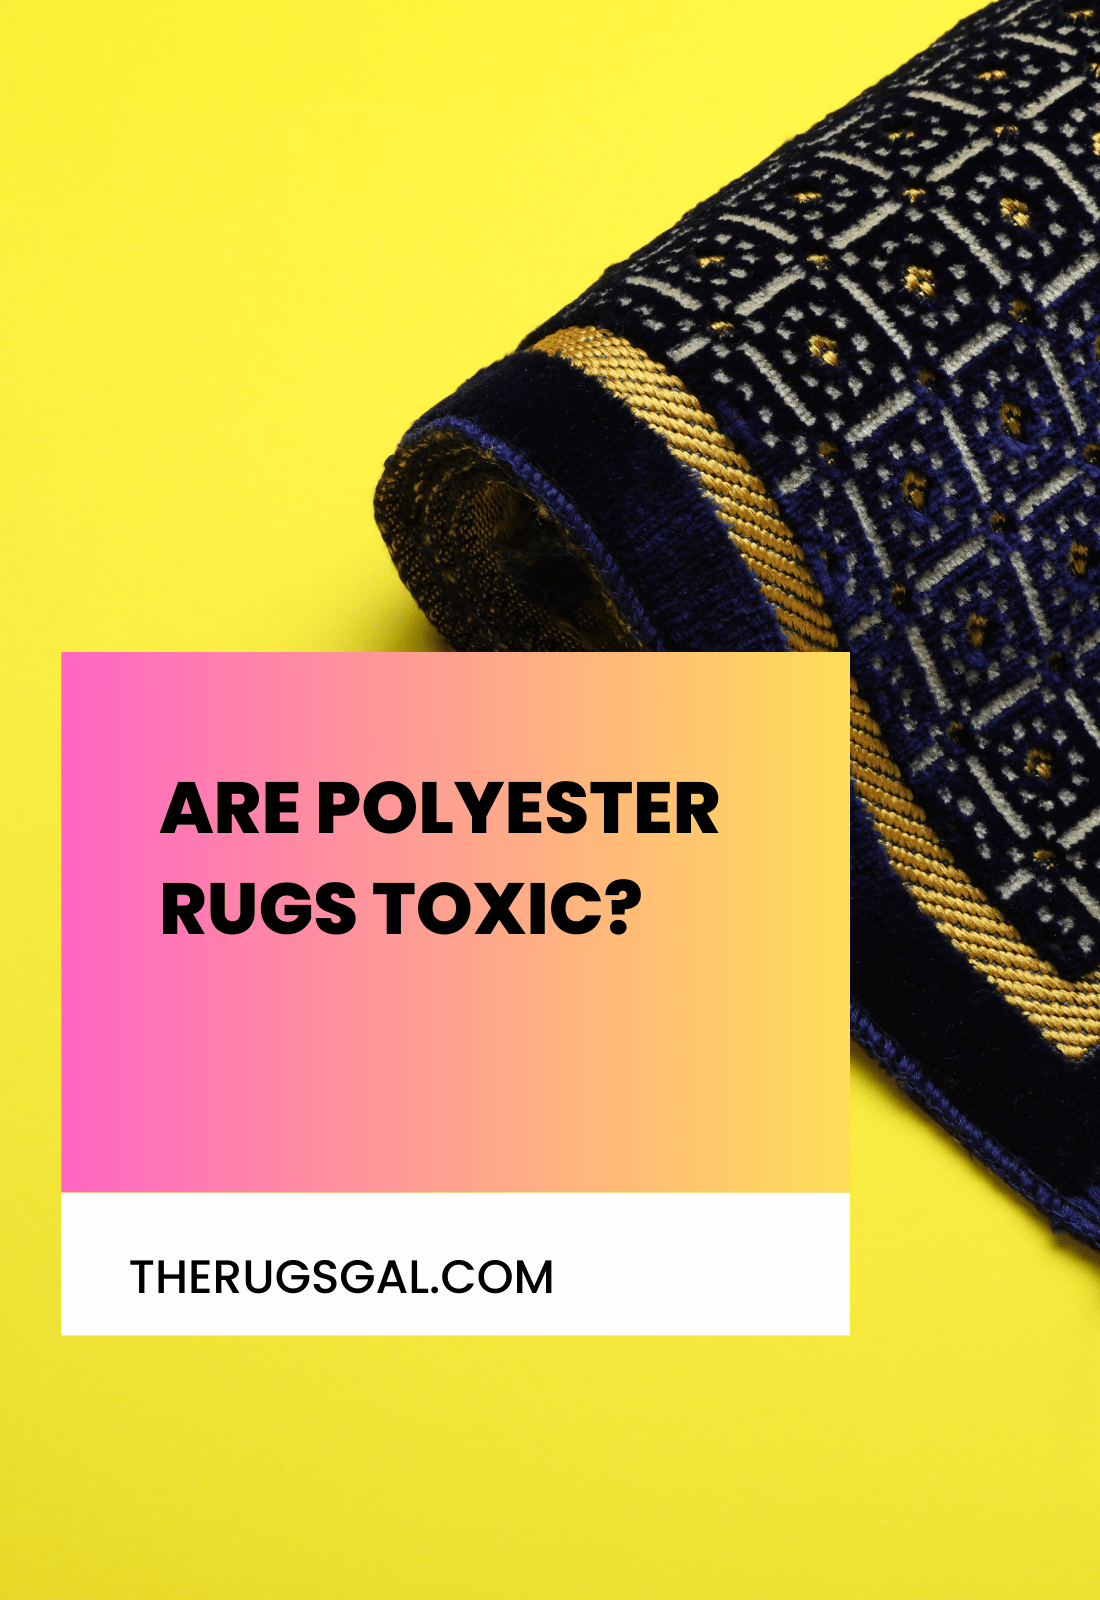 Are Polyester Rugs Toxic?